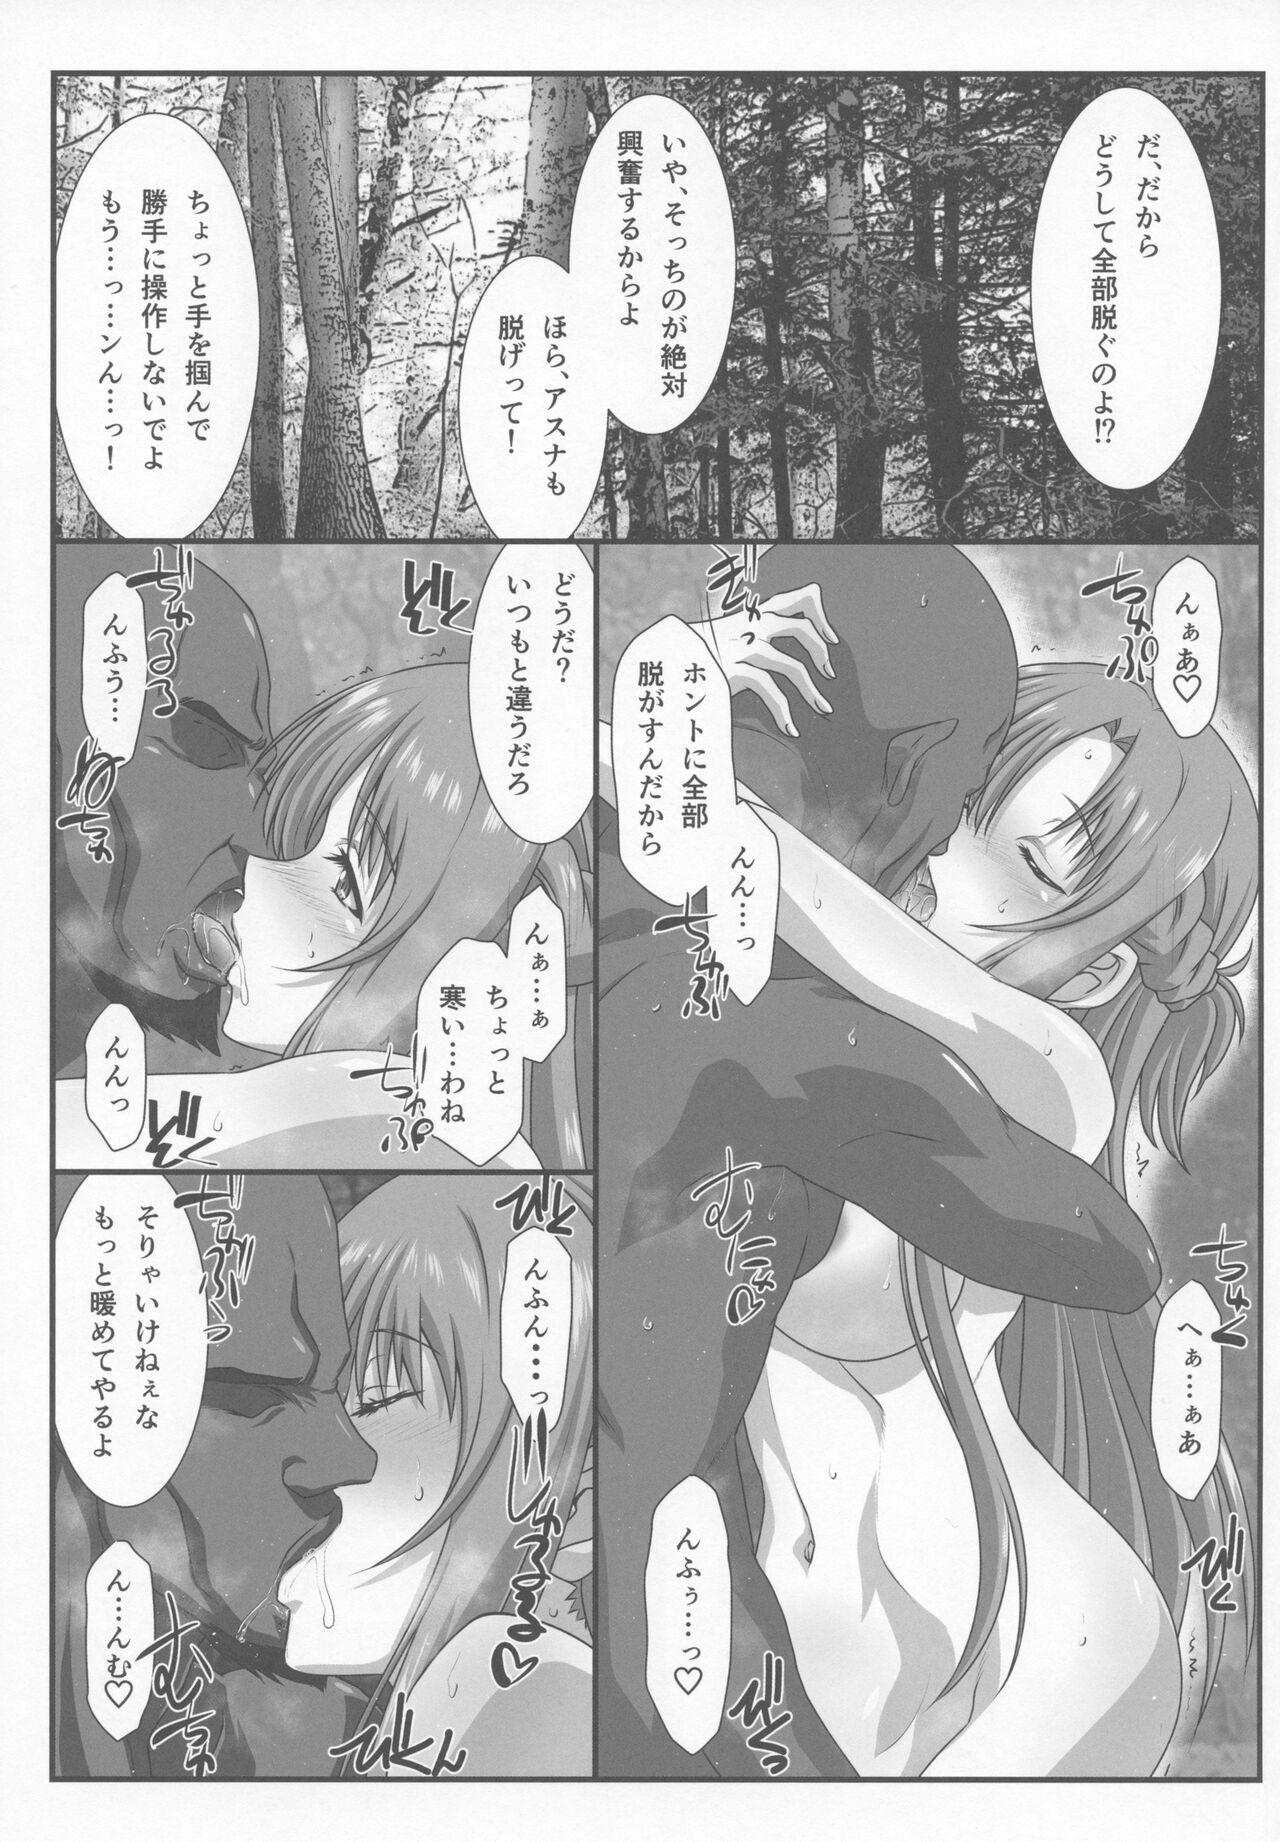 Footjob Astral Bout Ver. 45 - Sword art online Doggy Style - Page 4